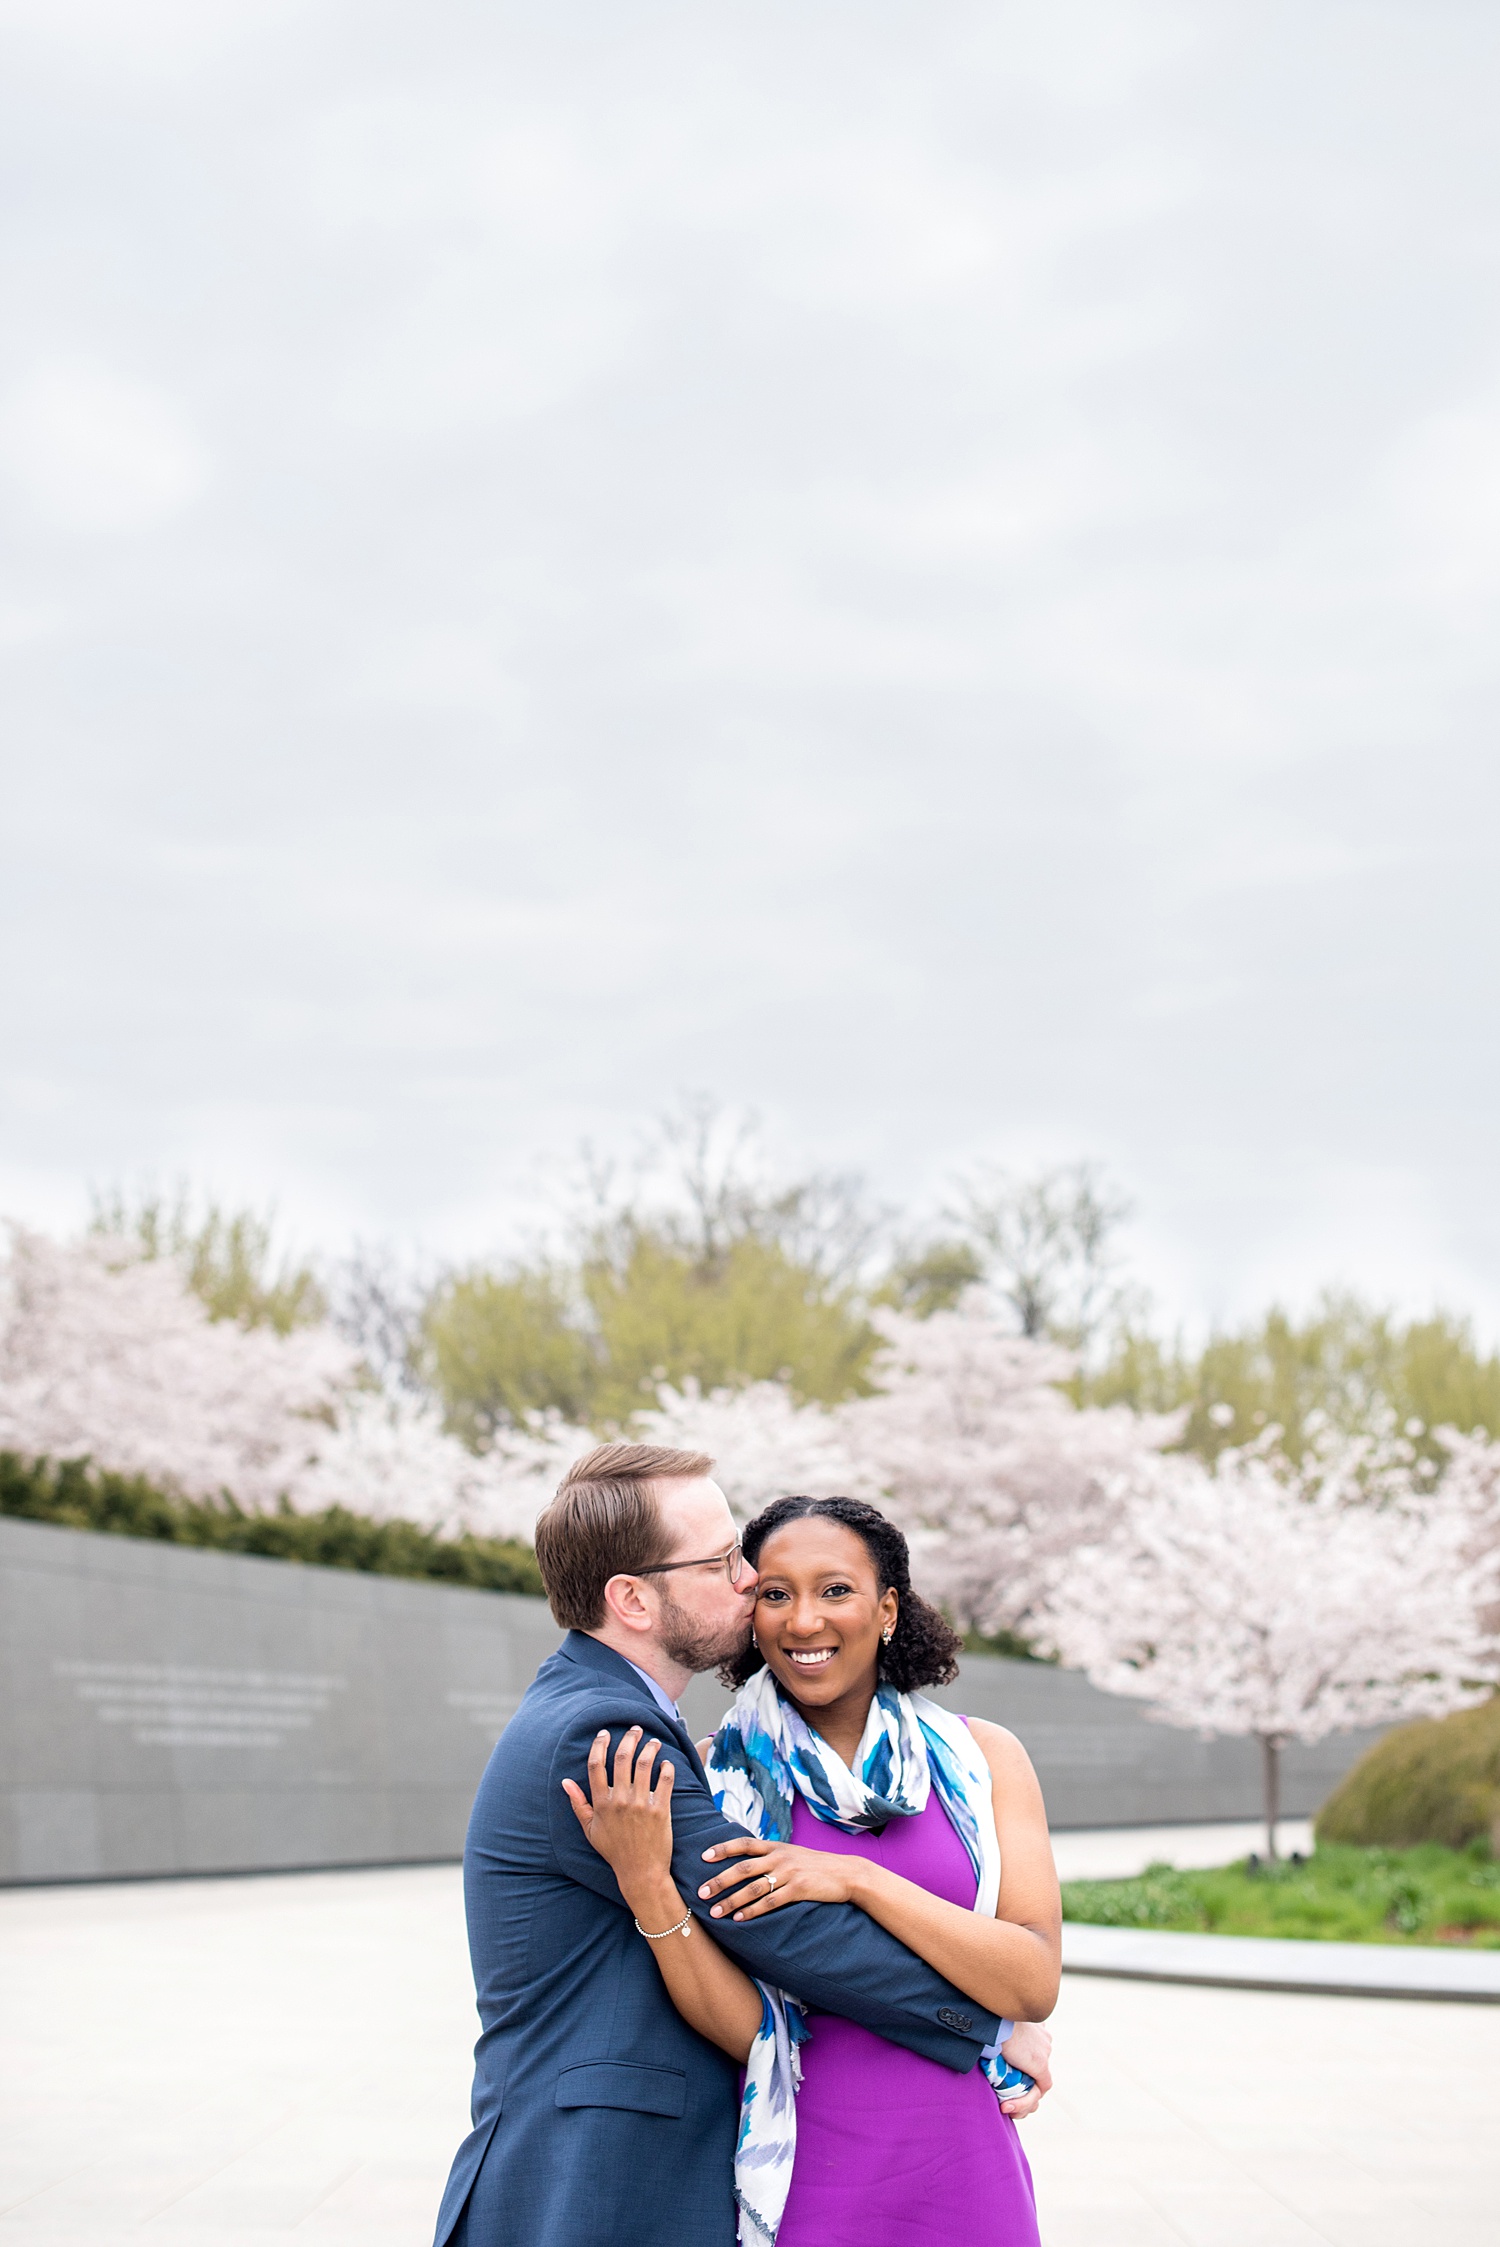 DC Cherry Blossoms Engagement Photos by Mikkel Paige Photography. Spring flowers around the MLK memorial and Tidal Basin at the nation's Capitol with an interracial couple. #DCCherryBlossoms #CherryBlossoms #EngagementPhotos #SpringEngagementPhotos #CherryBlossomsEngagementPhotos